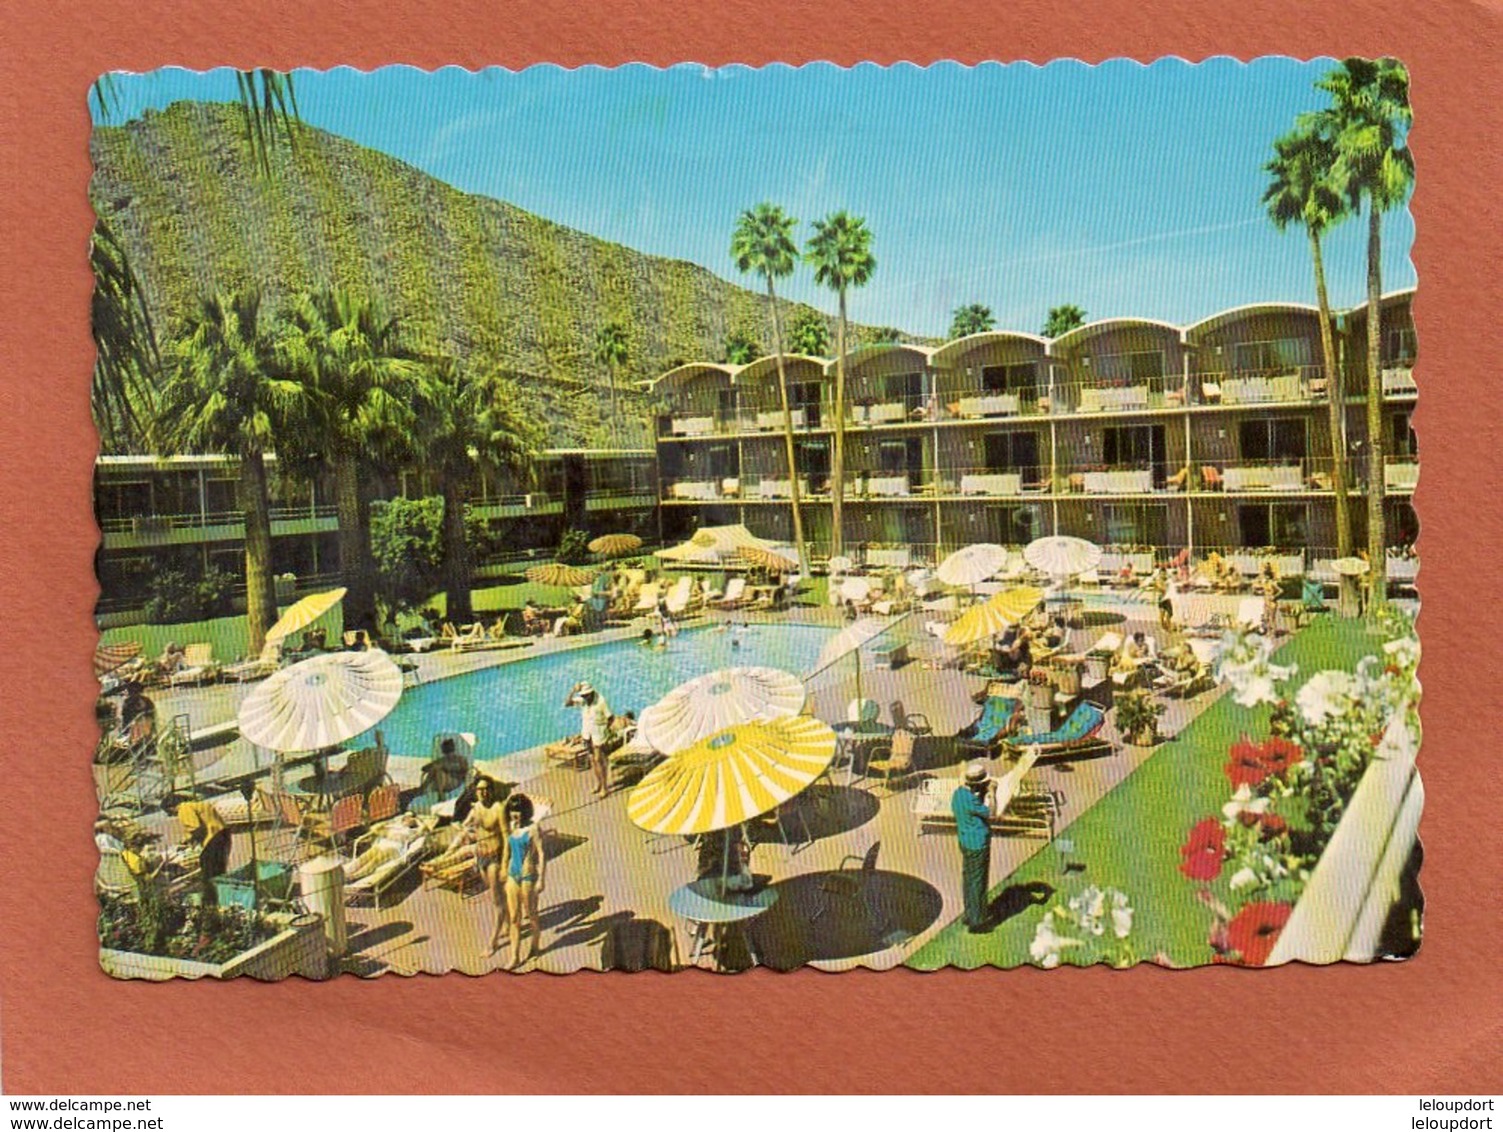 THE SHERATON OASIS HOTEL  A COMPLETE DESERT RESORT HOTEL - Palm Springs